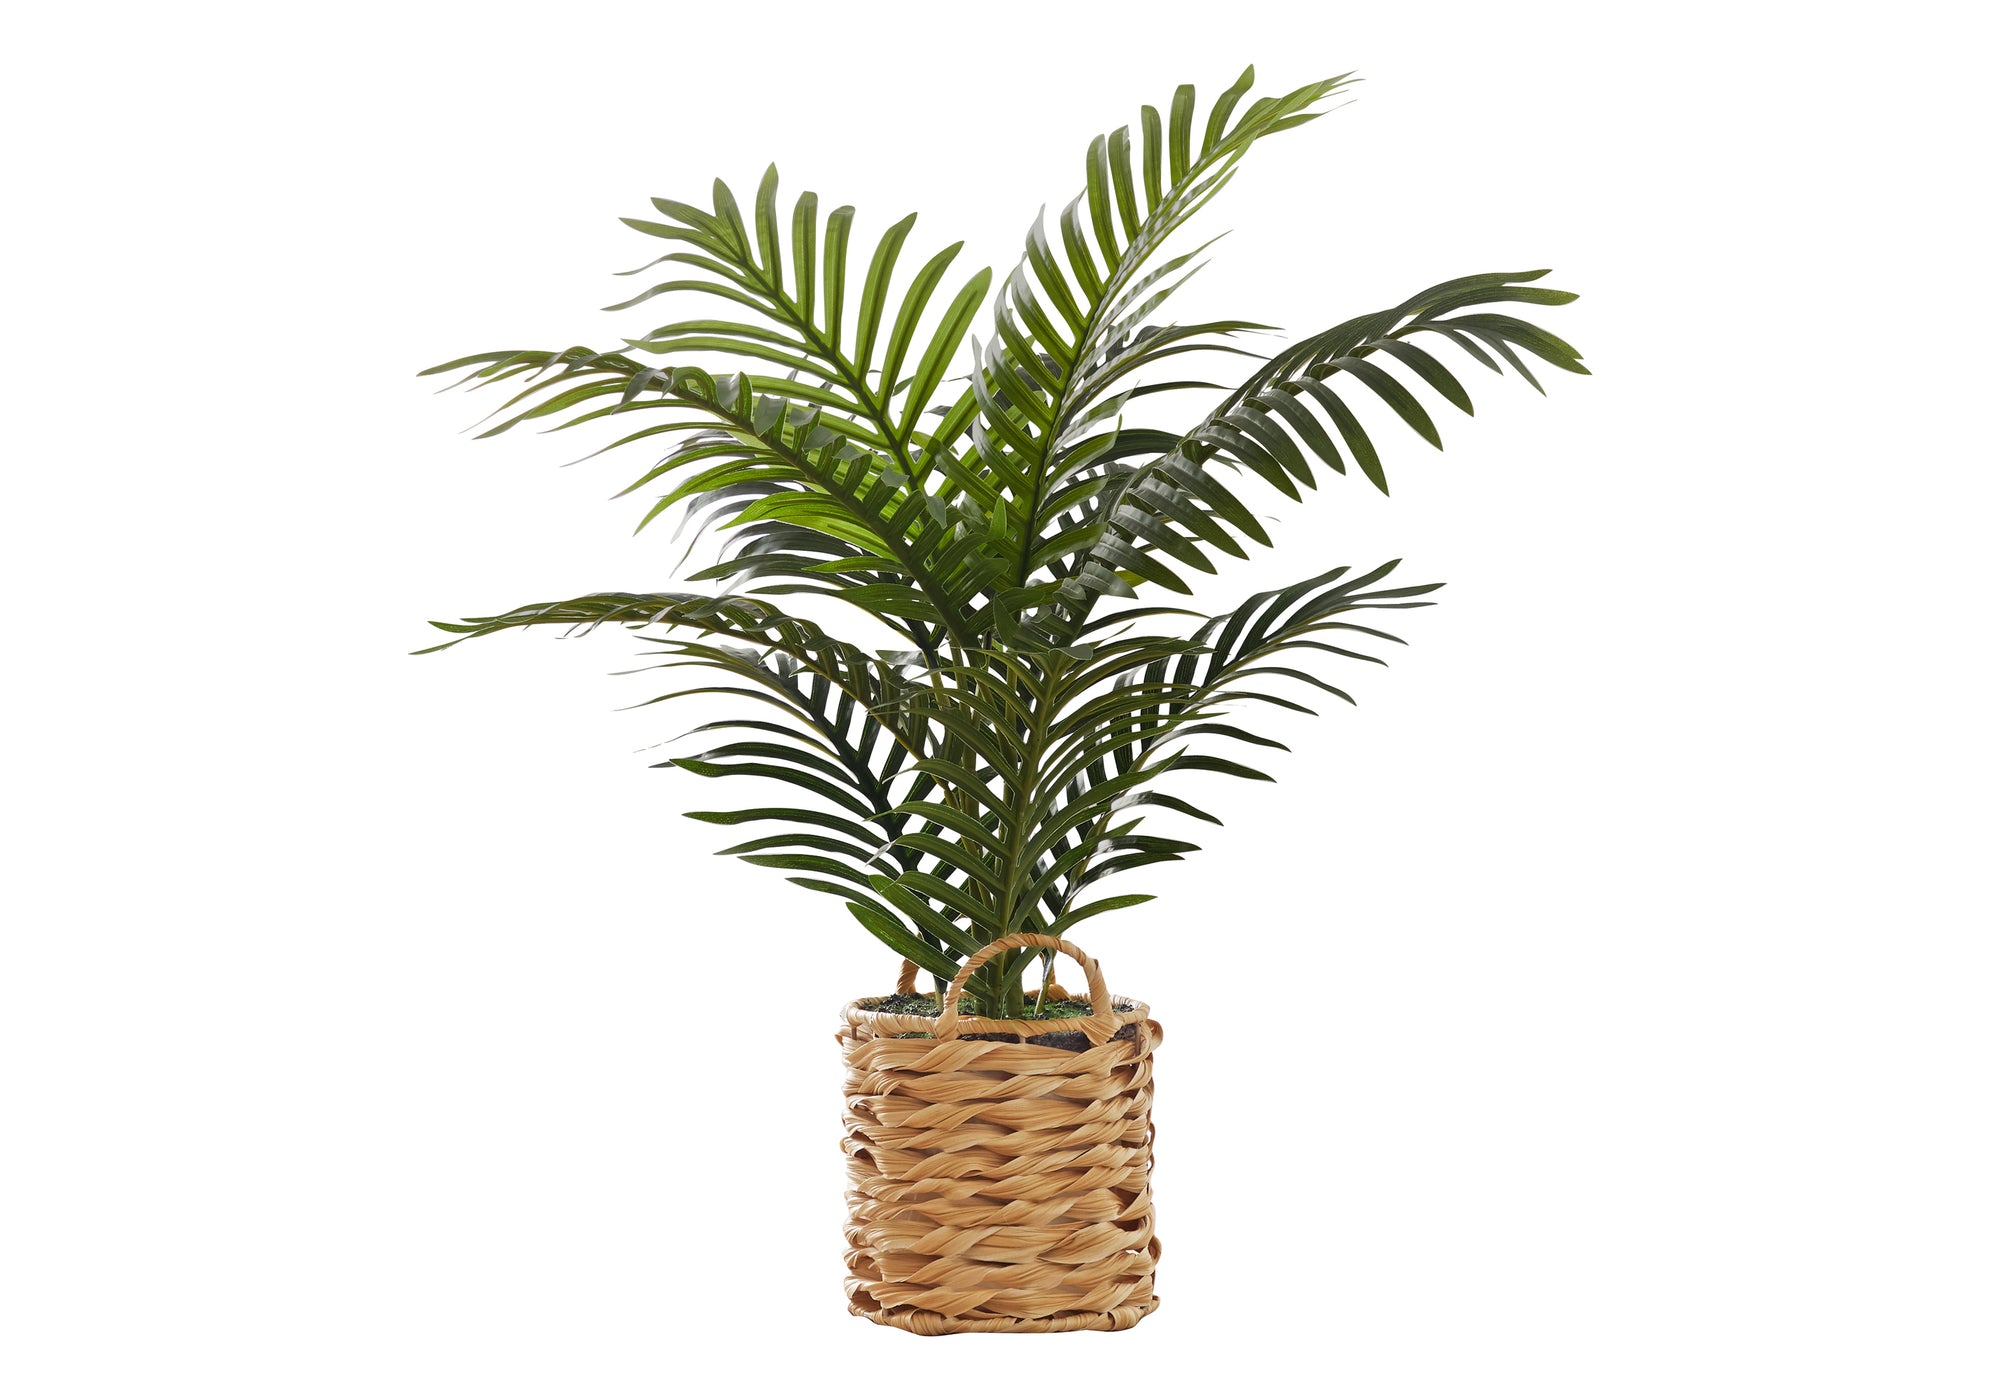 MN-249503    Artificial Plant, 24" Tall, Palm, Indoor, Faux, Fake, Table, Floor, Greenery, Potted, Real Touch, Decorative, Green Leaves, Beige Woven Basket